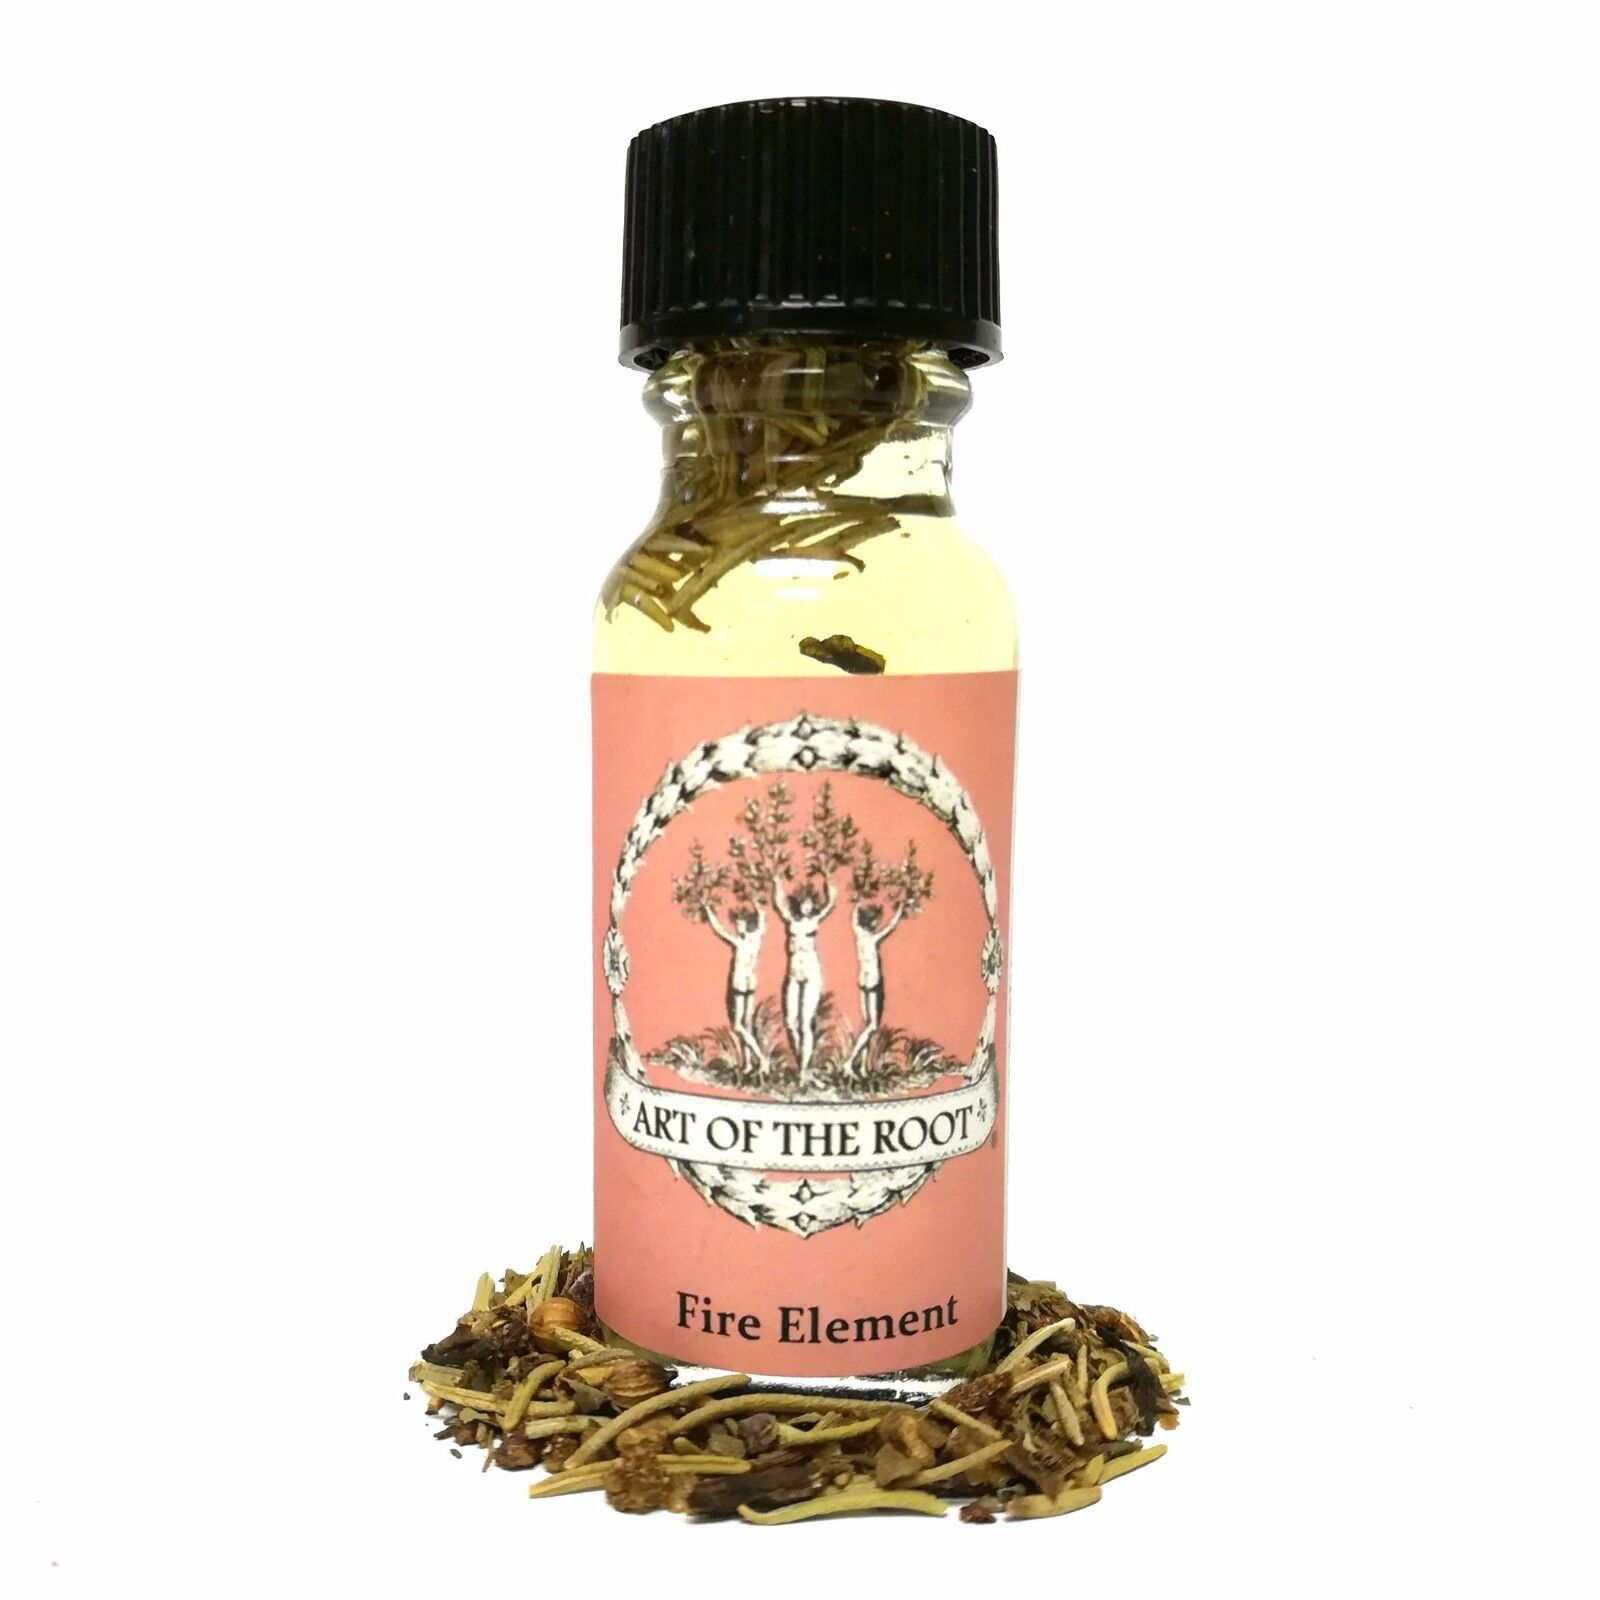 Fire Elemental Oil Passion, Courage & Purification Wiccan, Pagan, Hoodoo Voodoo